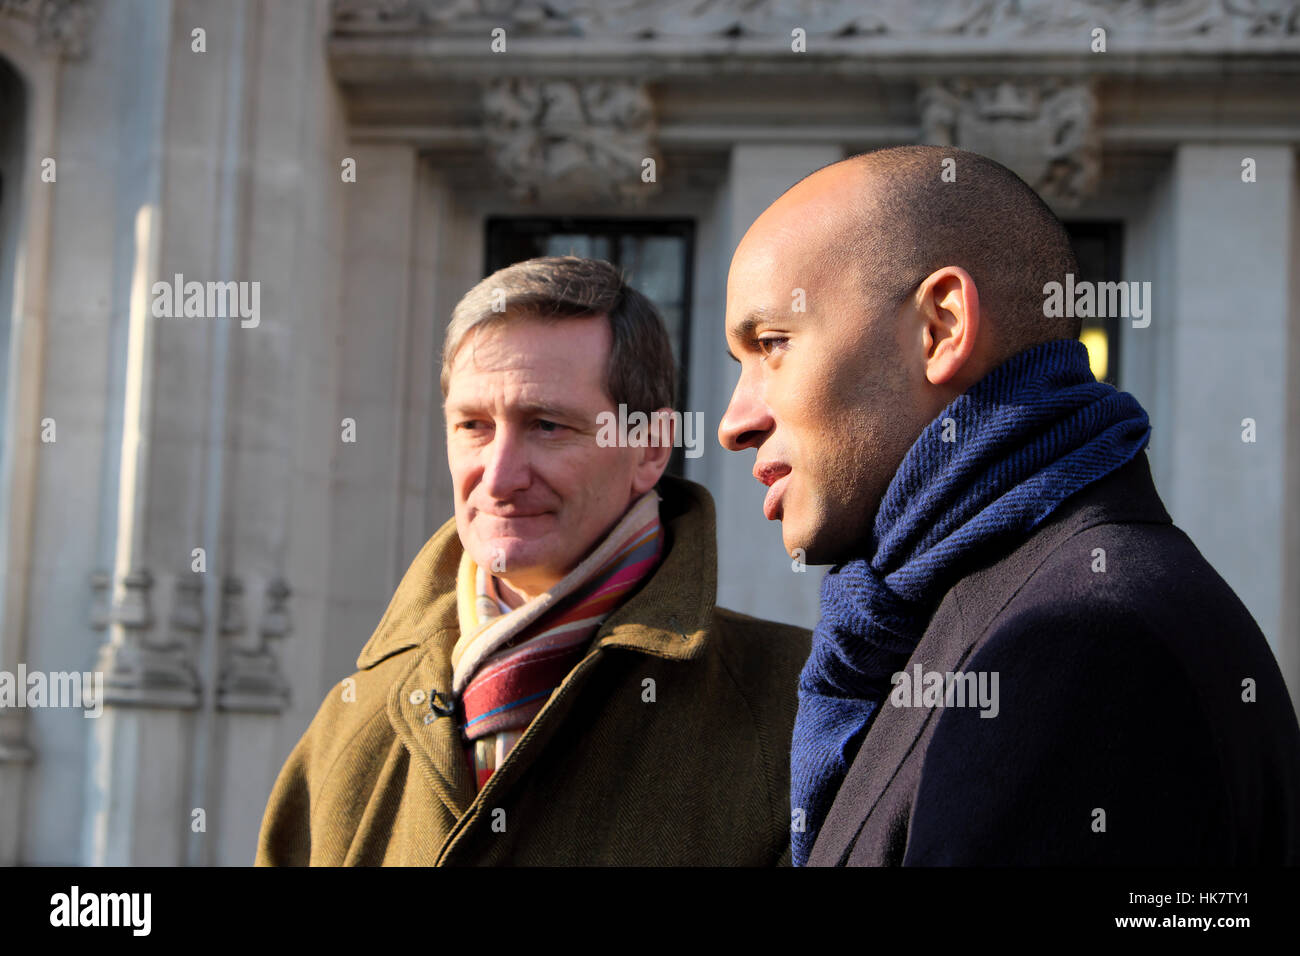 Dominic Grieve and Chuka Ummuna  outside Supreme Court after Article 50 ruling in favor of Parliament, London UK   KATHY DEWITT Stock Photo